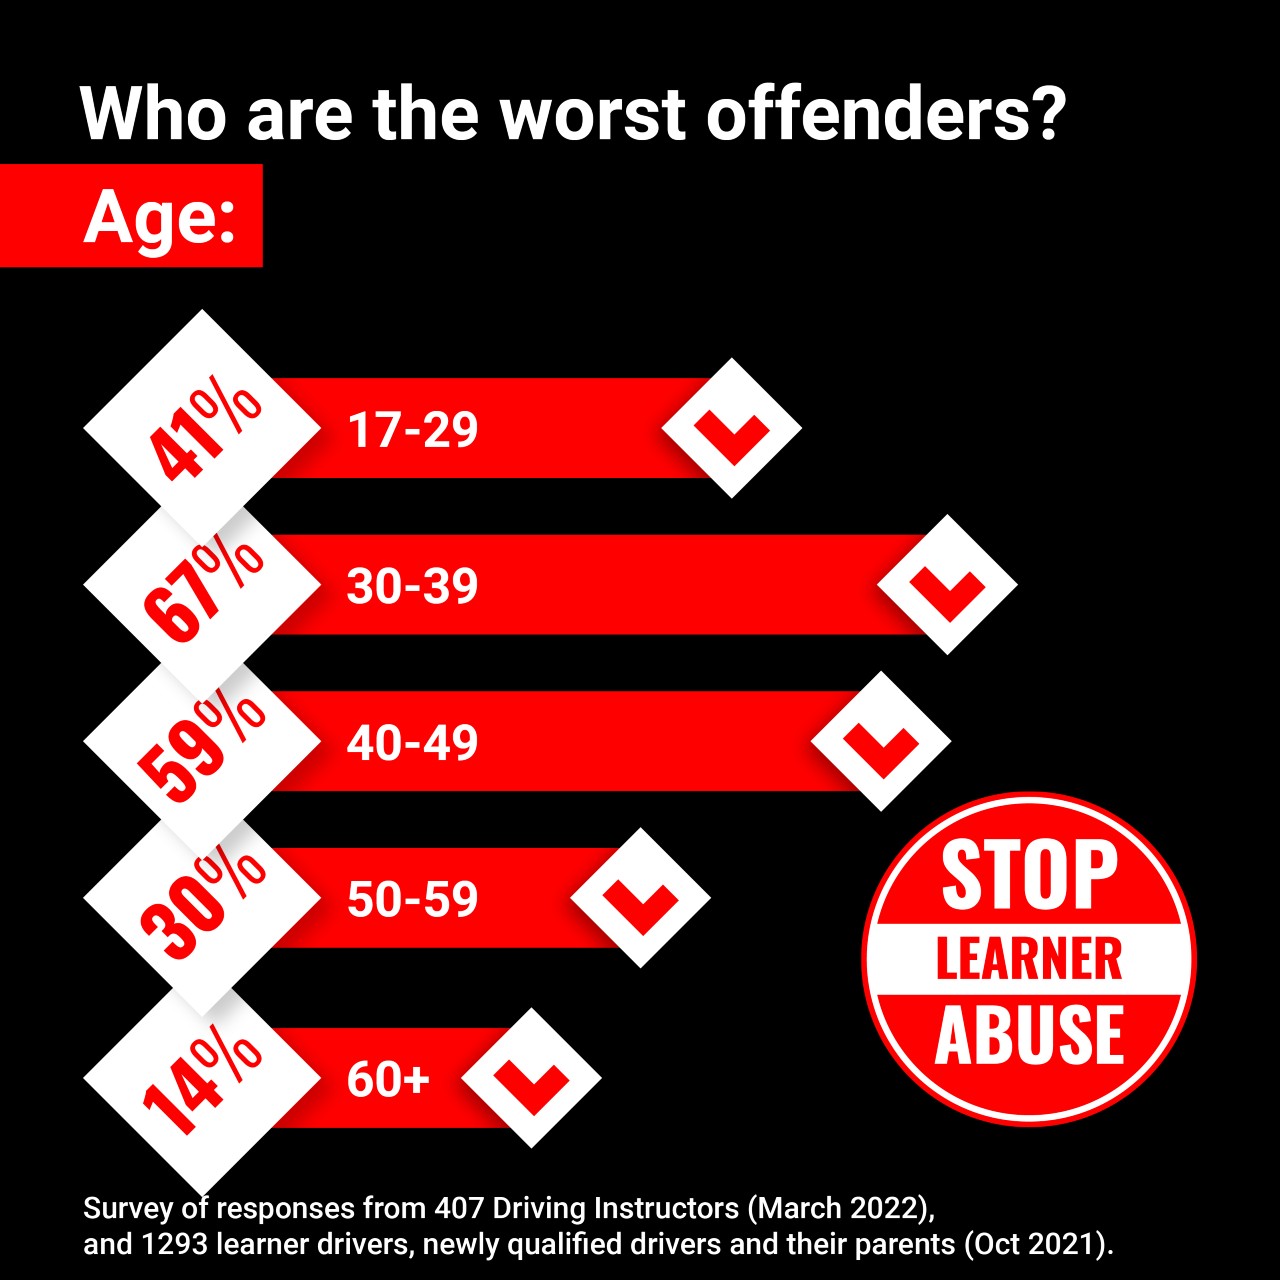 Age of worst offenders